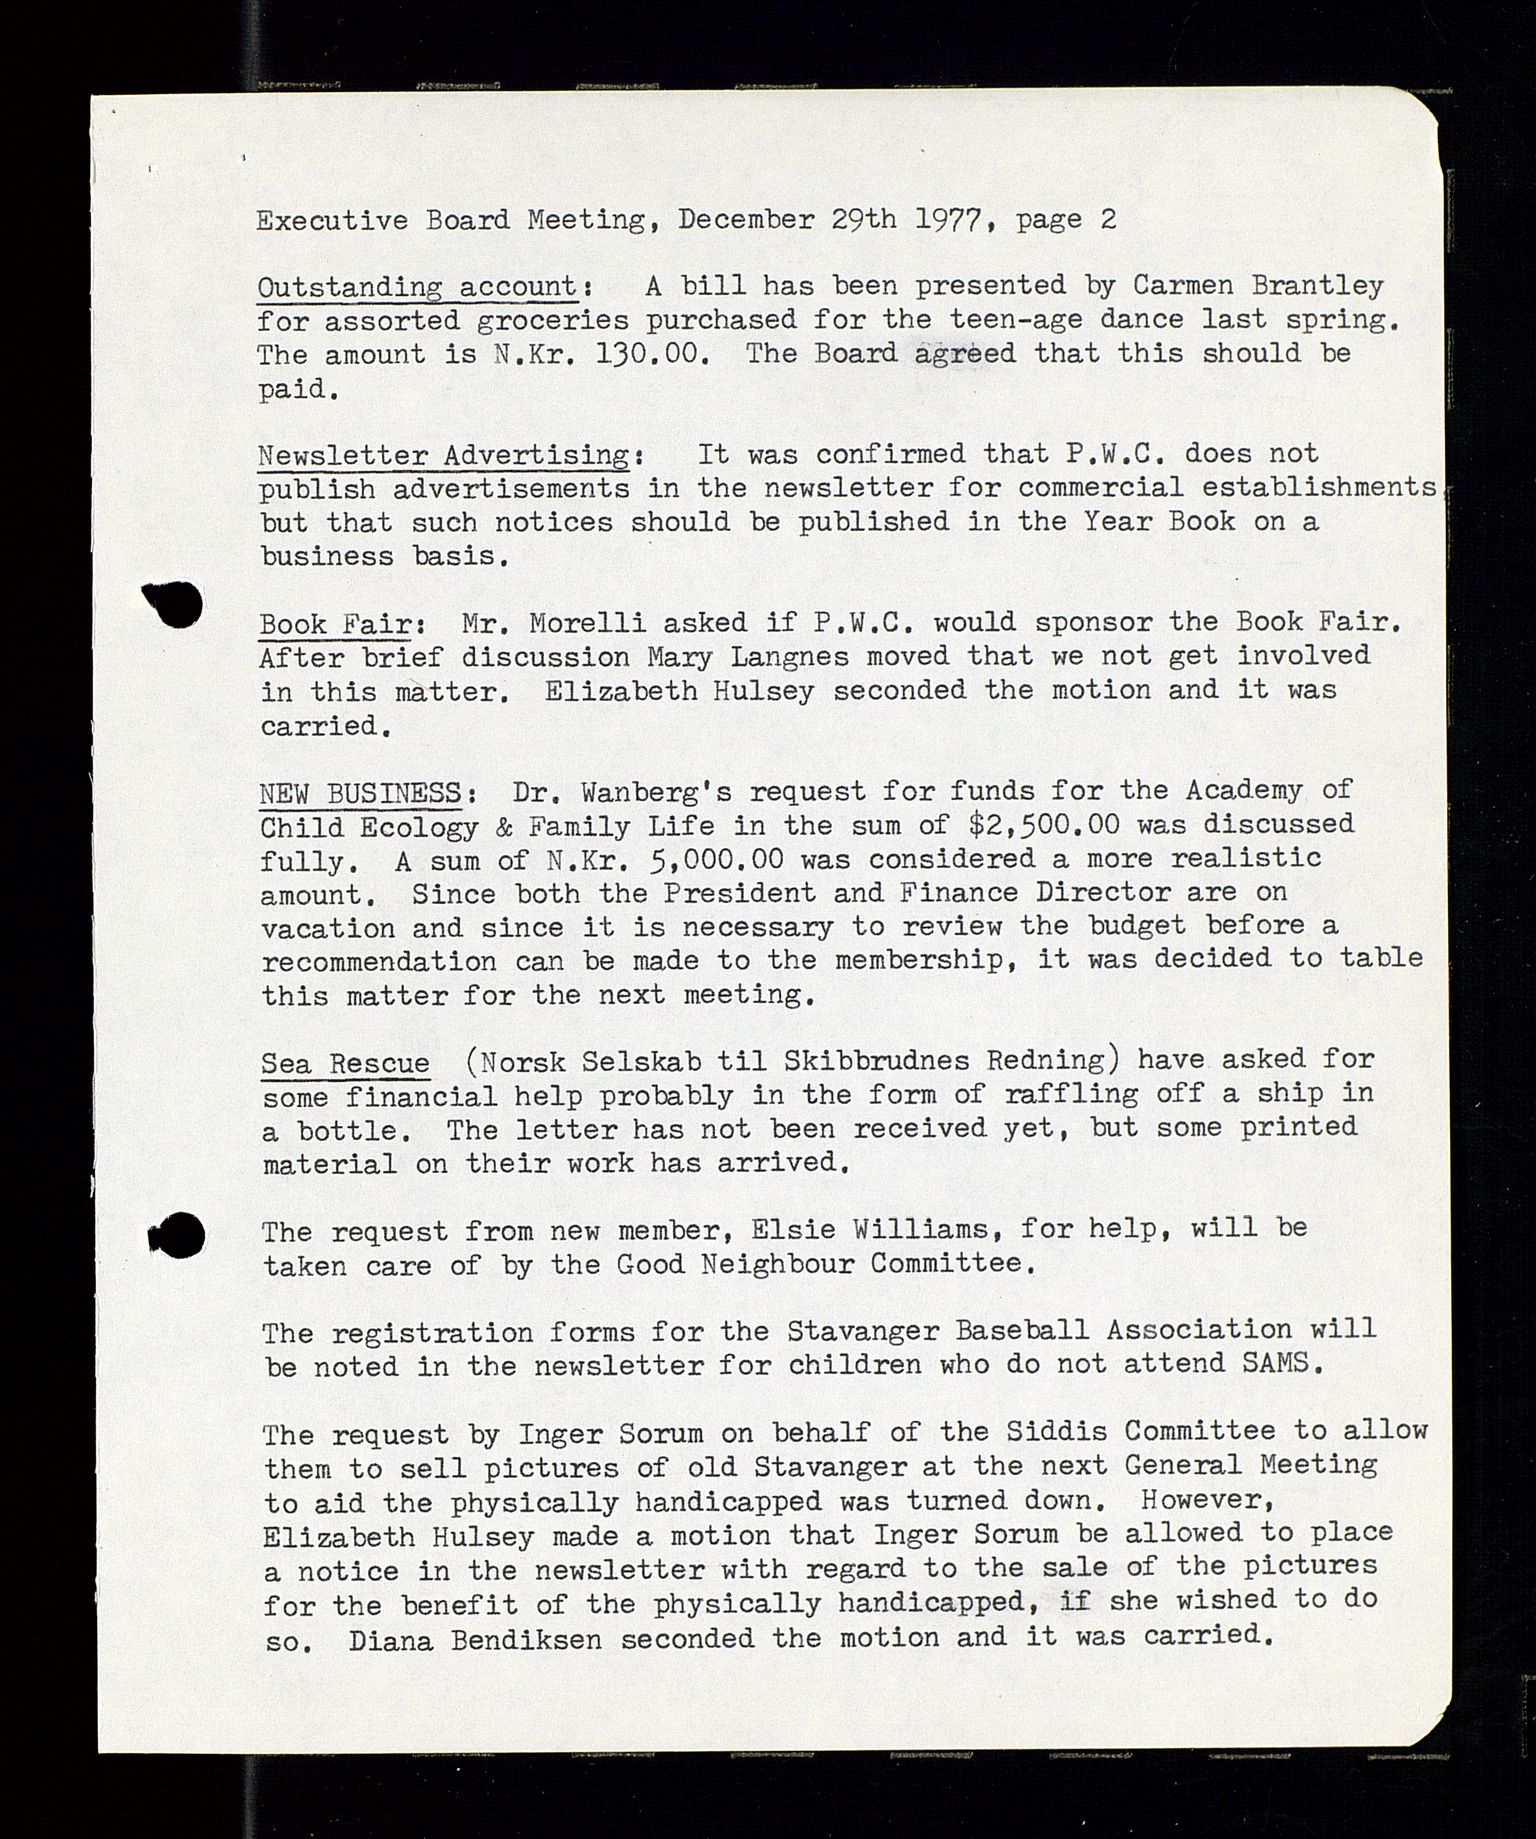 PA 1547 - Petroleum Wives Club, SAST/A-101974/A/Aa/L0001: Board and General Meeting, 1970-1983